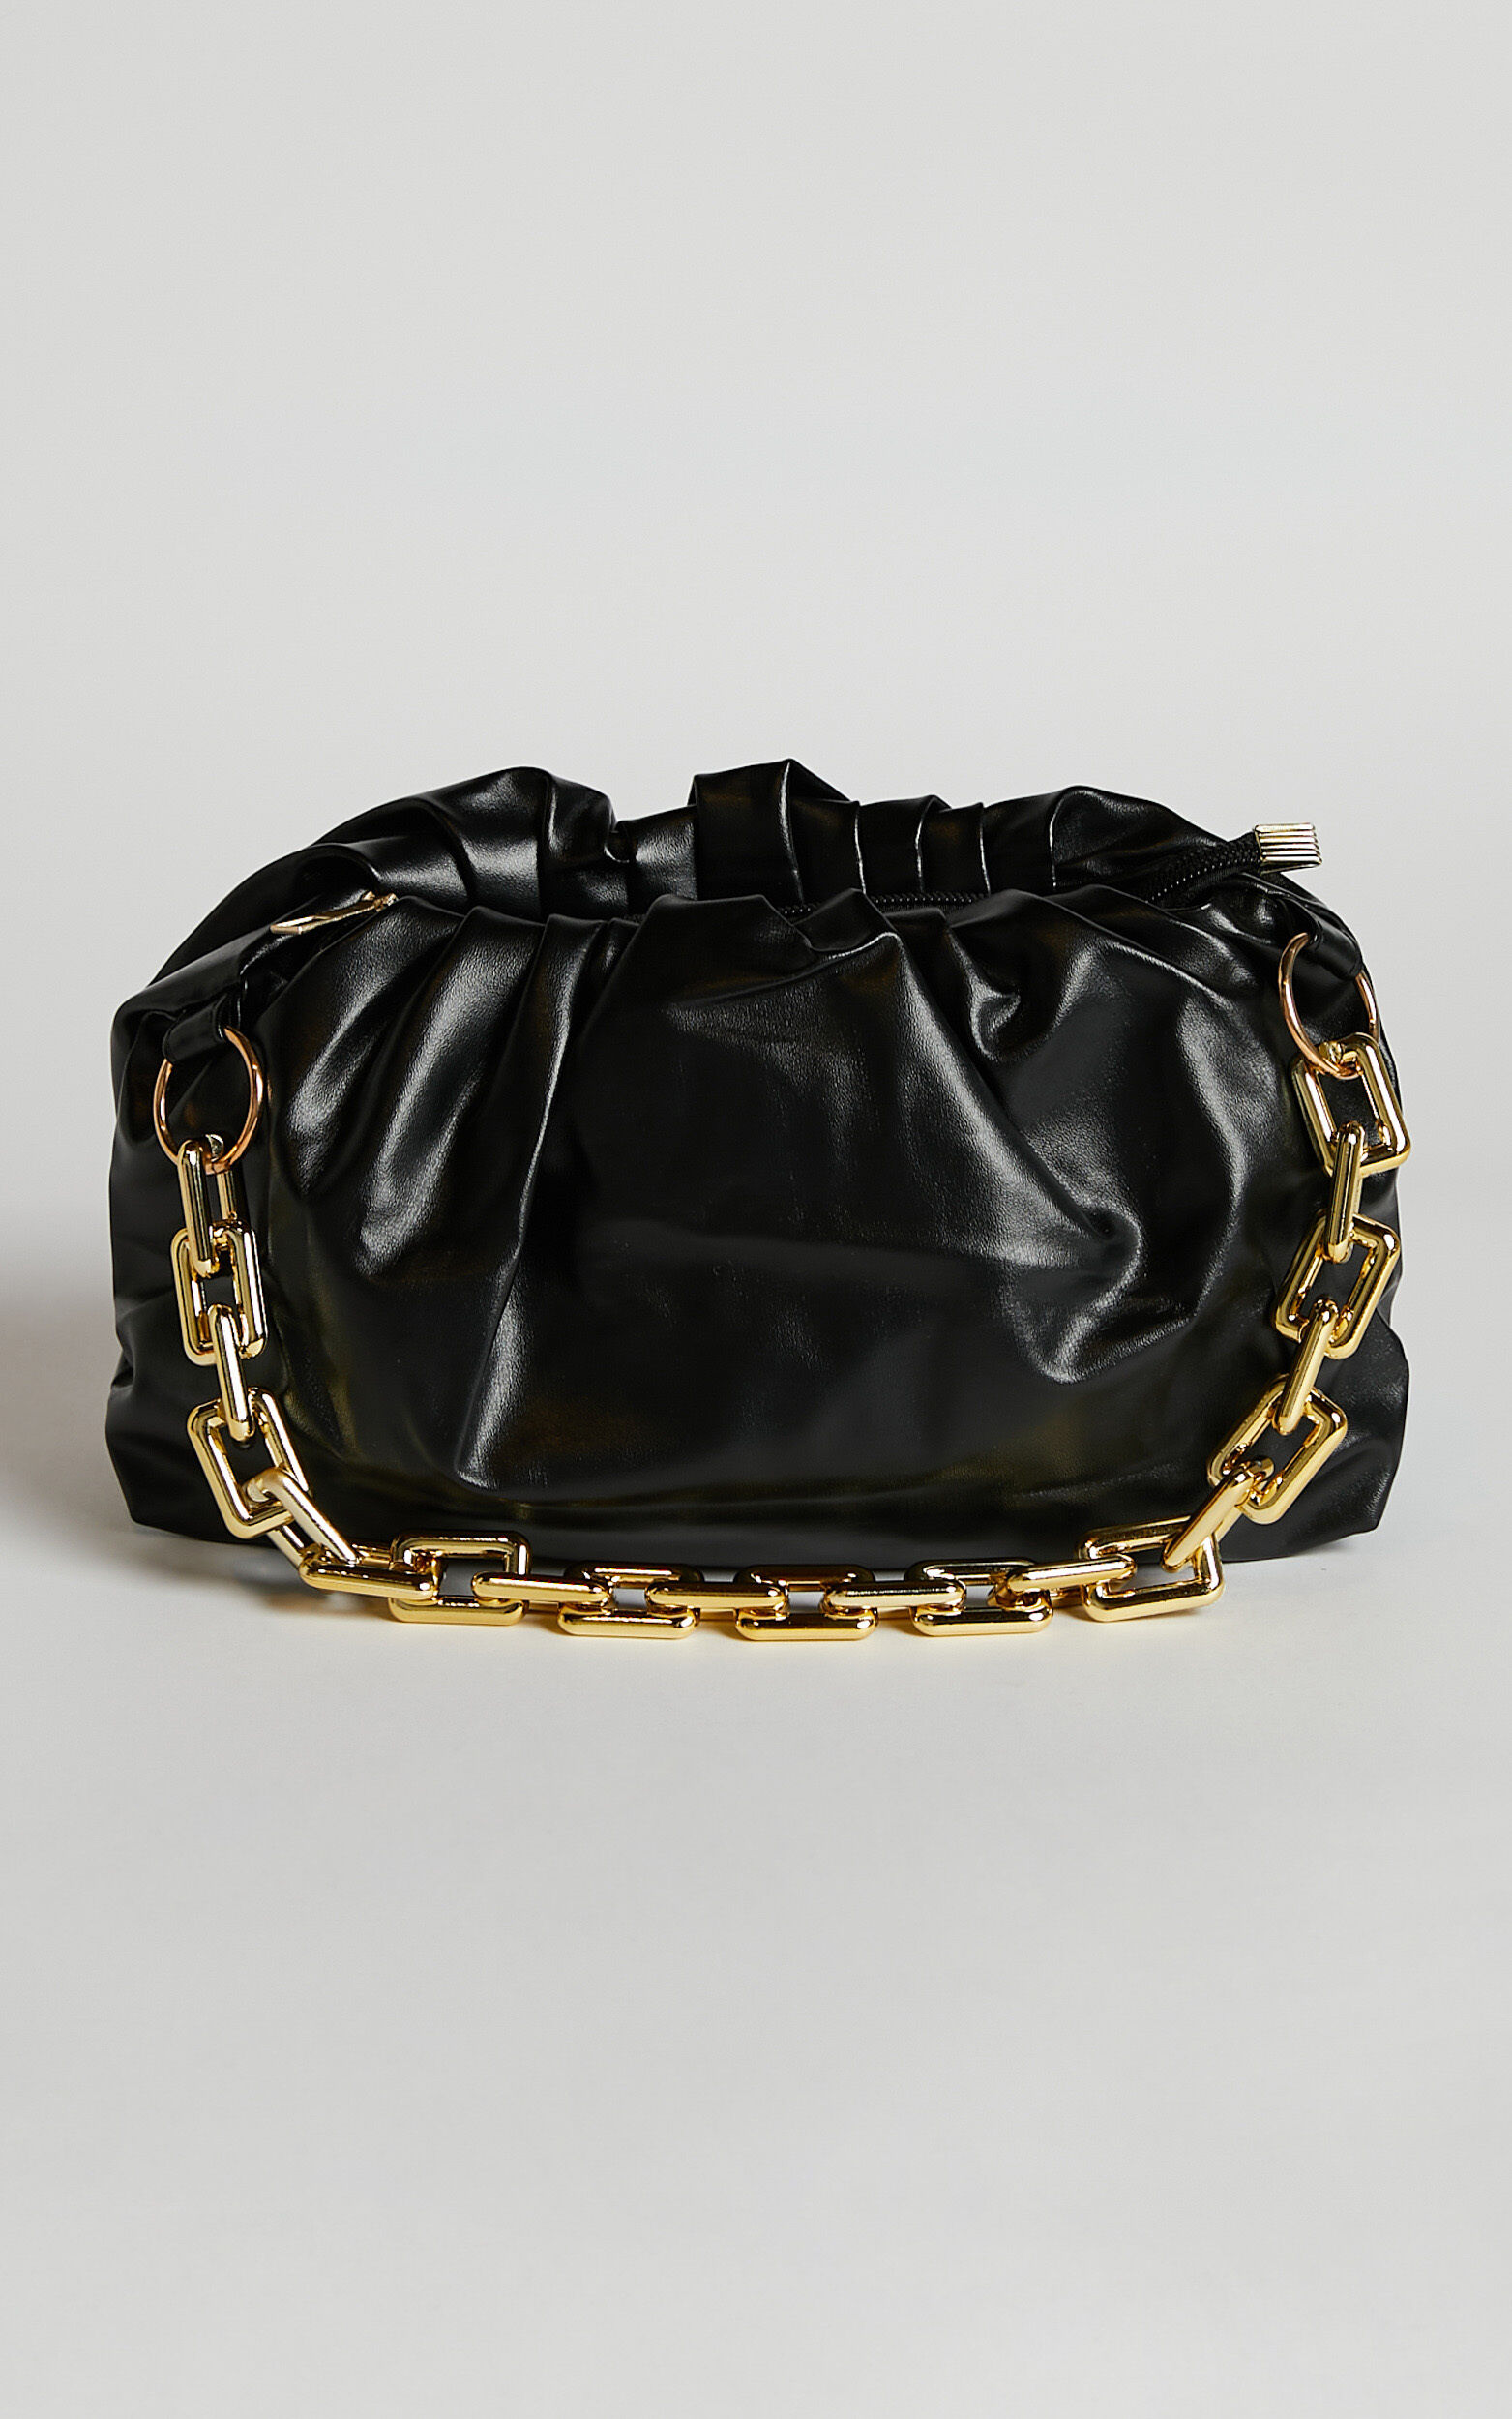 chanel quilted bag with chain strap crossbody